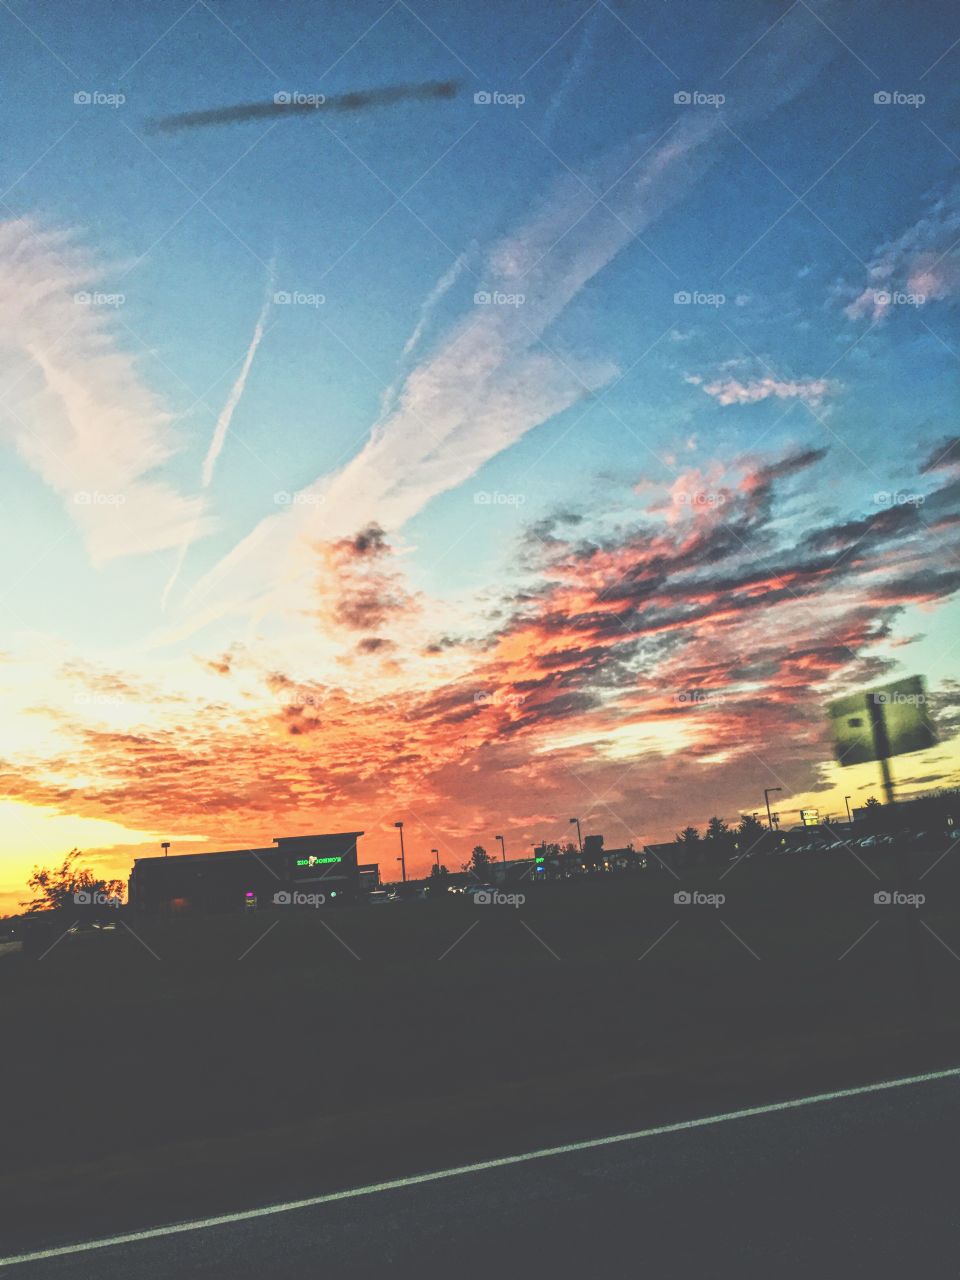 cotton candy sky